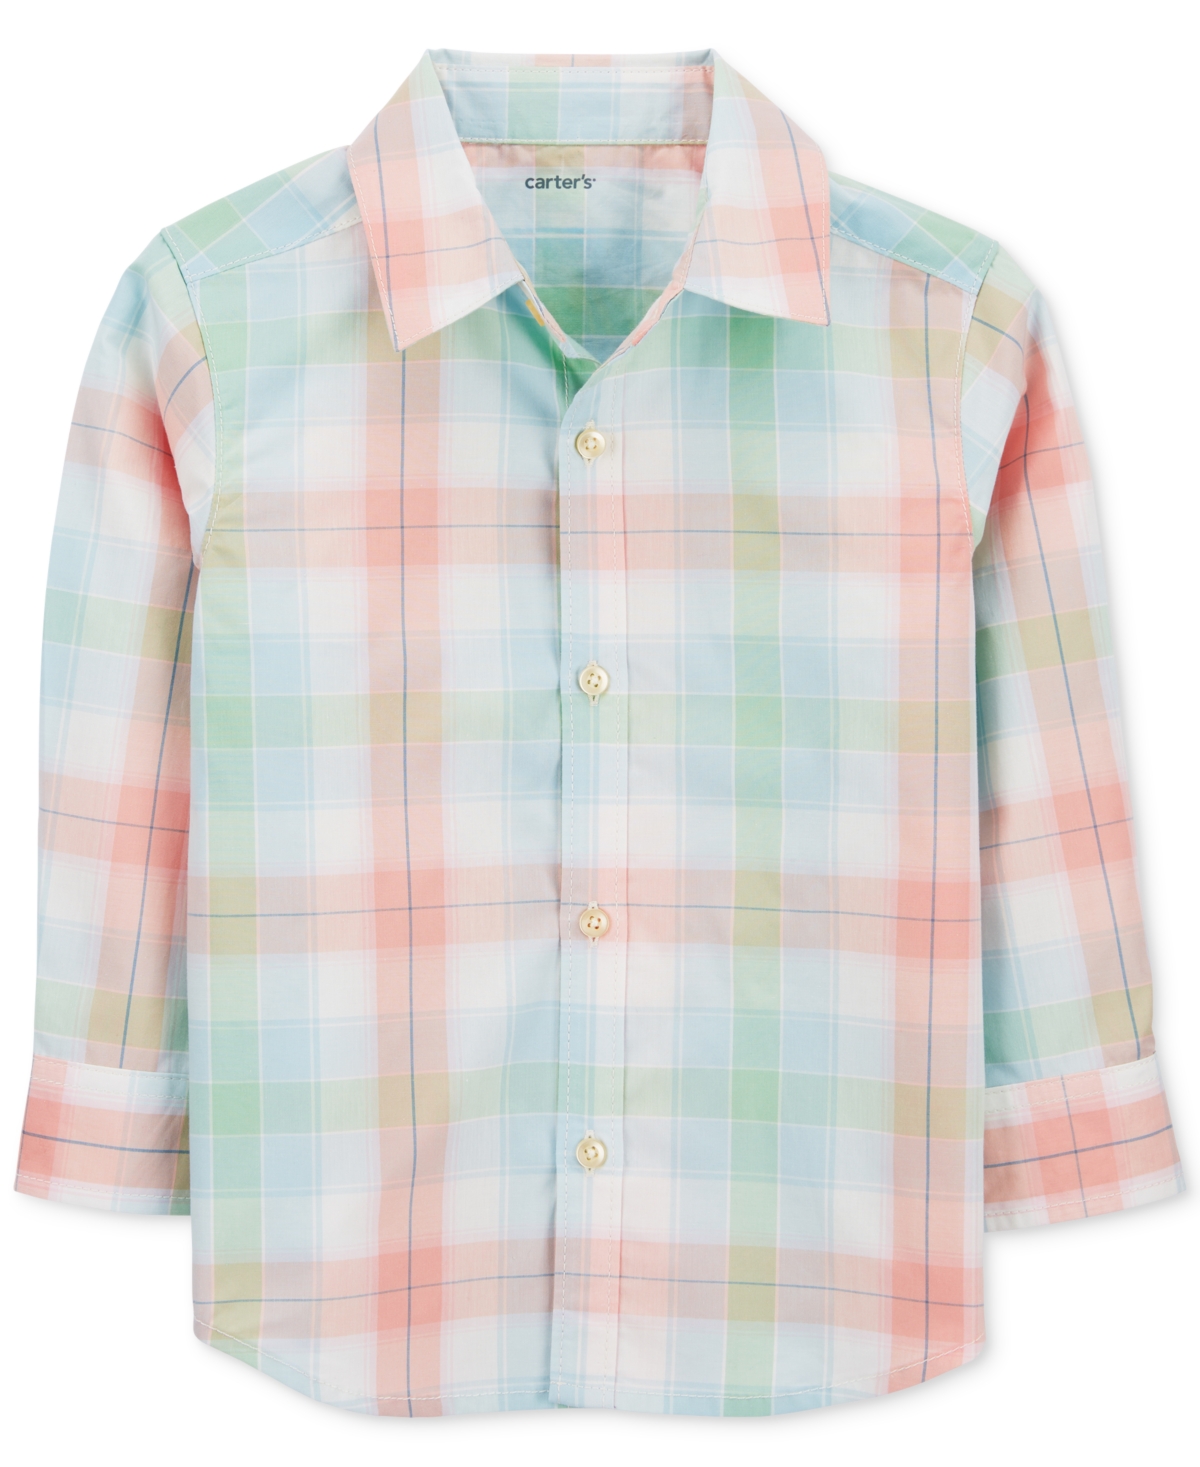 Carter's Kids' Toddler Boys Plaid Button Down Shirt In Multi